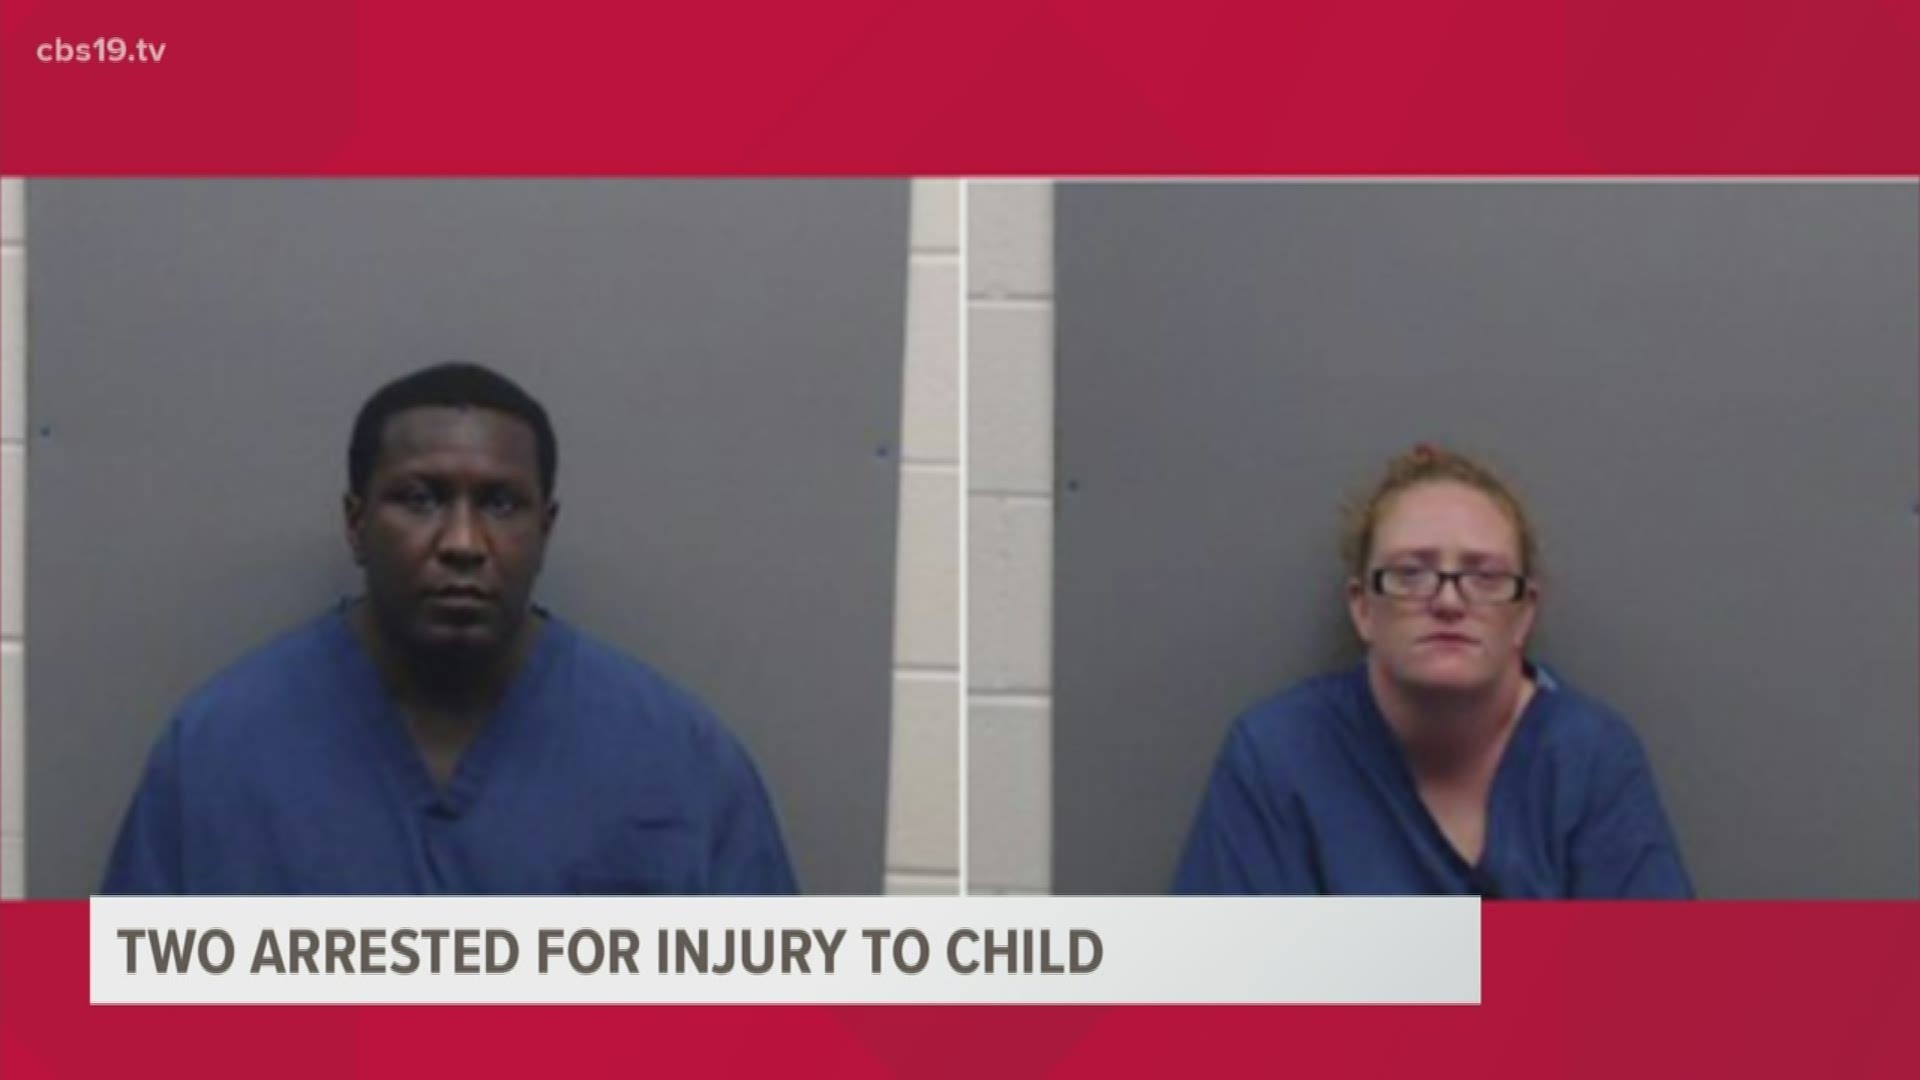 Courtnie Williams and Manuel Williams were arrested for injury to a child and booked into the Smith County Jail on $1 million bond each.